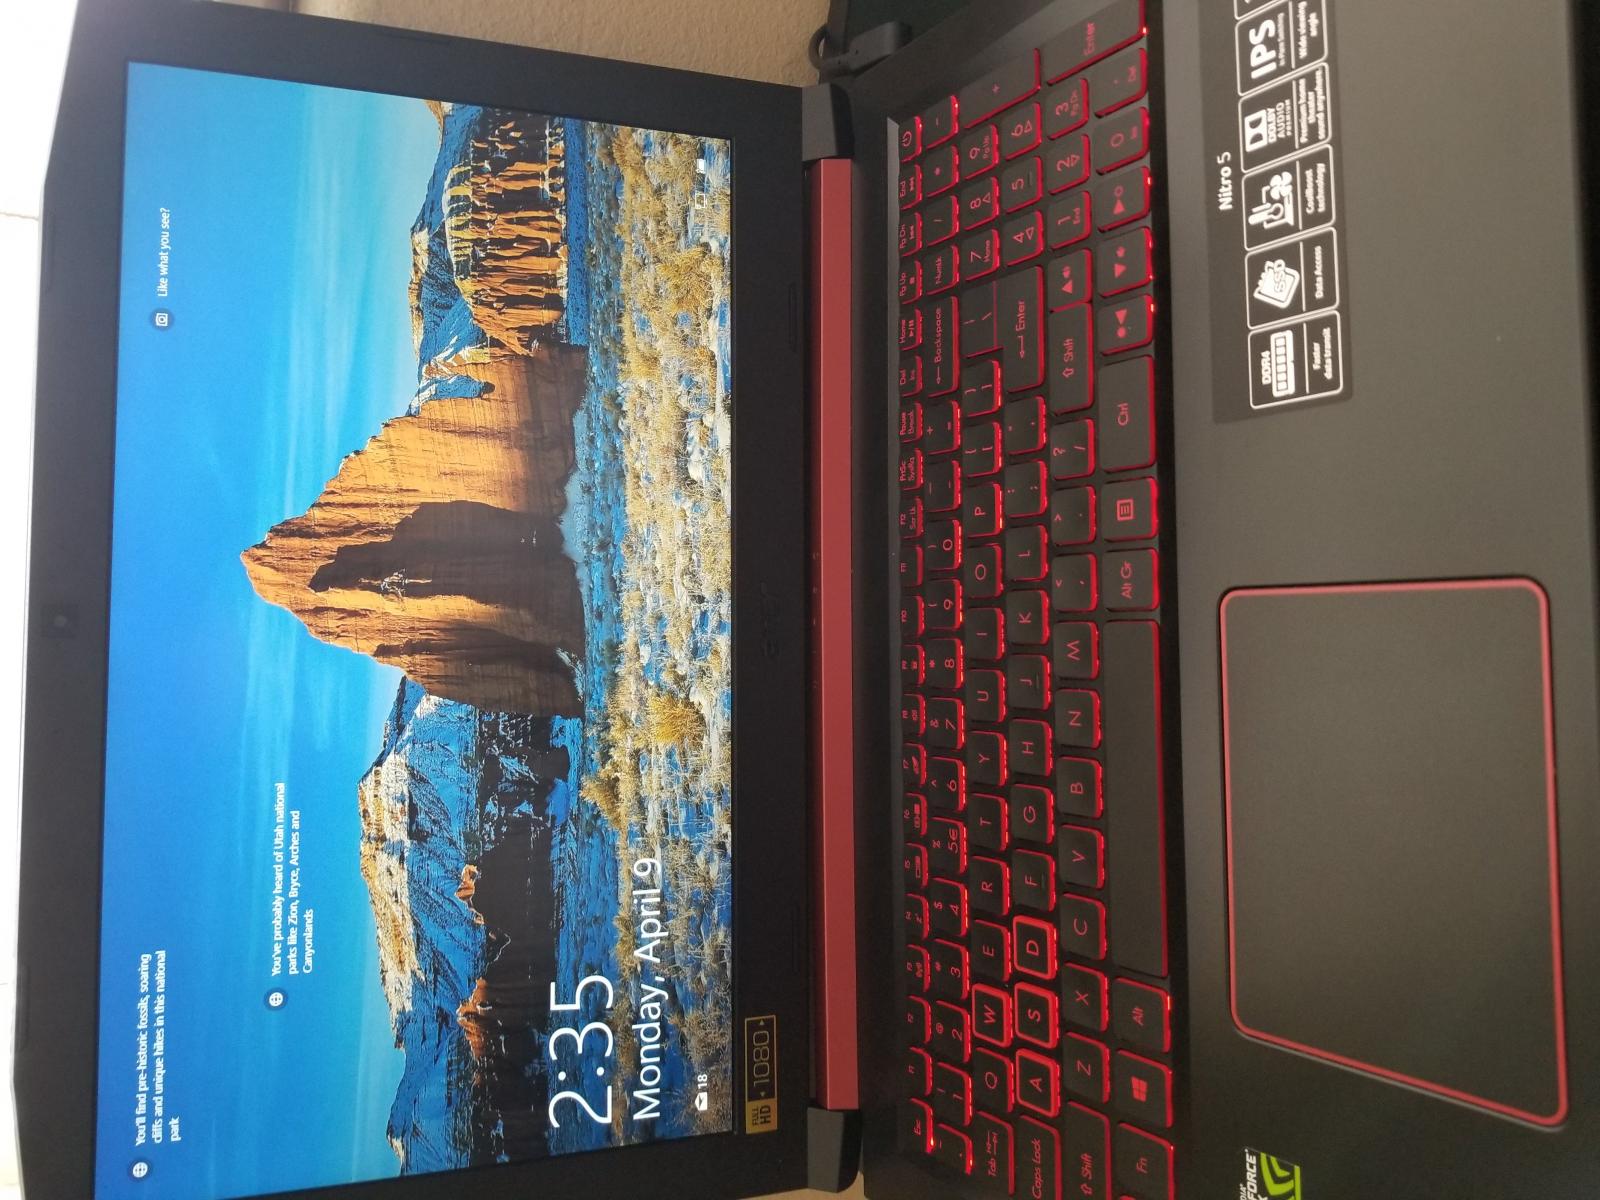 For sale Acer Nitro 5 Gaming laptop + extra 1TB Seagate Firecuda hybrid drive